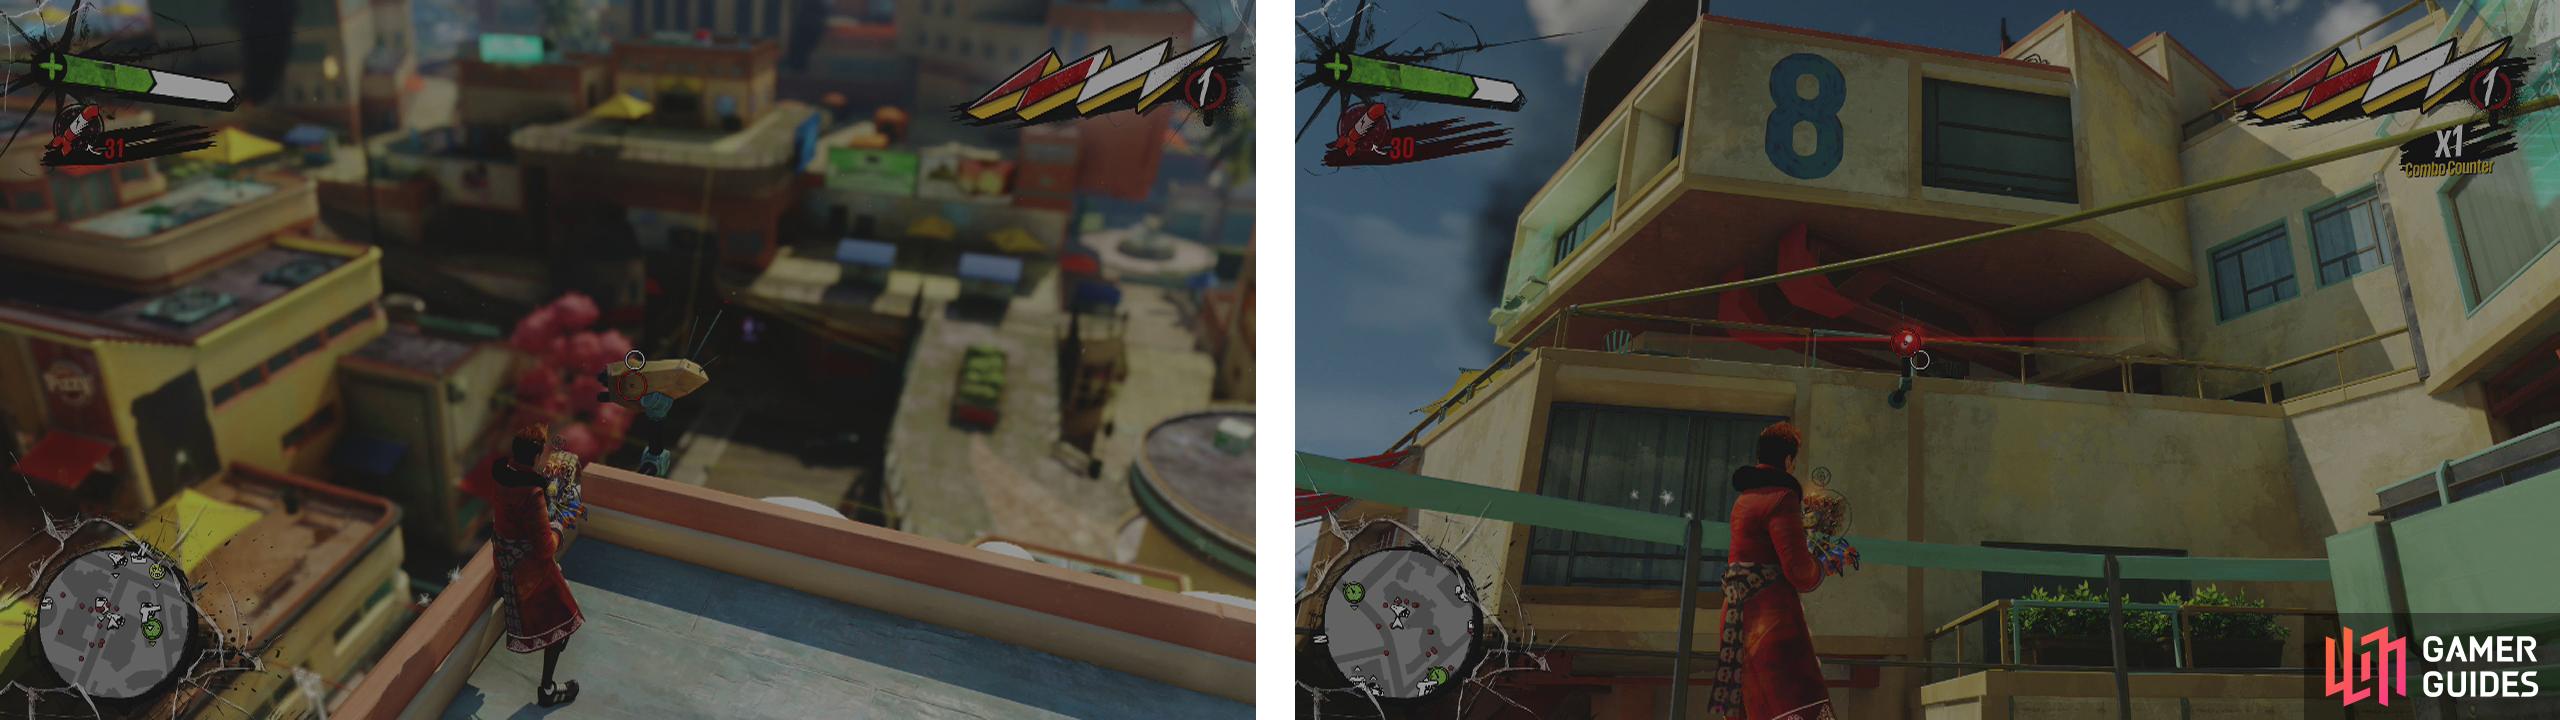 The Champion achievement in Sunset Overdrive